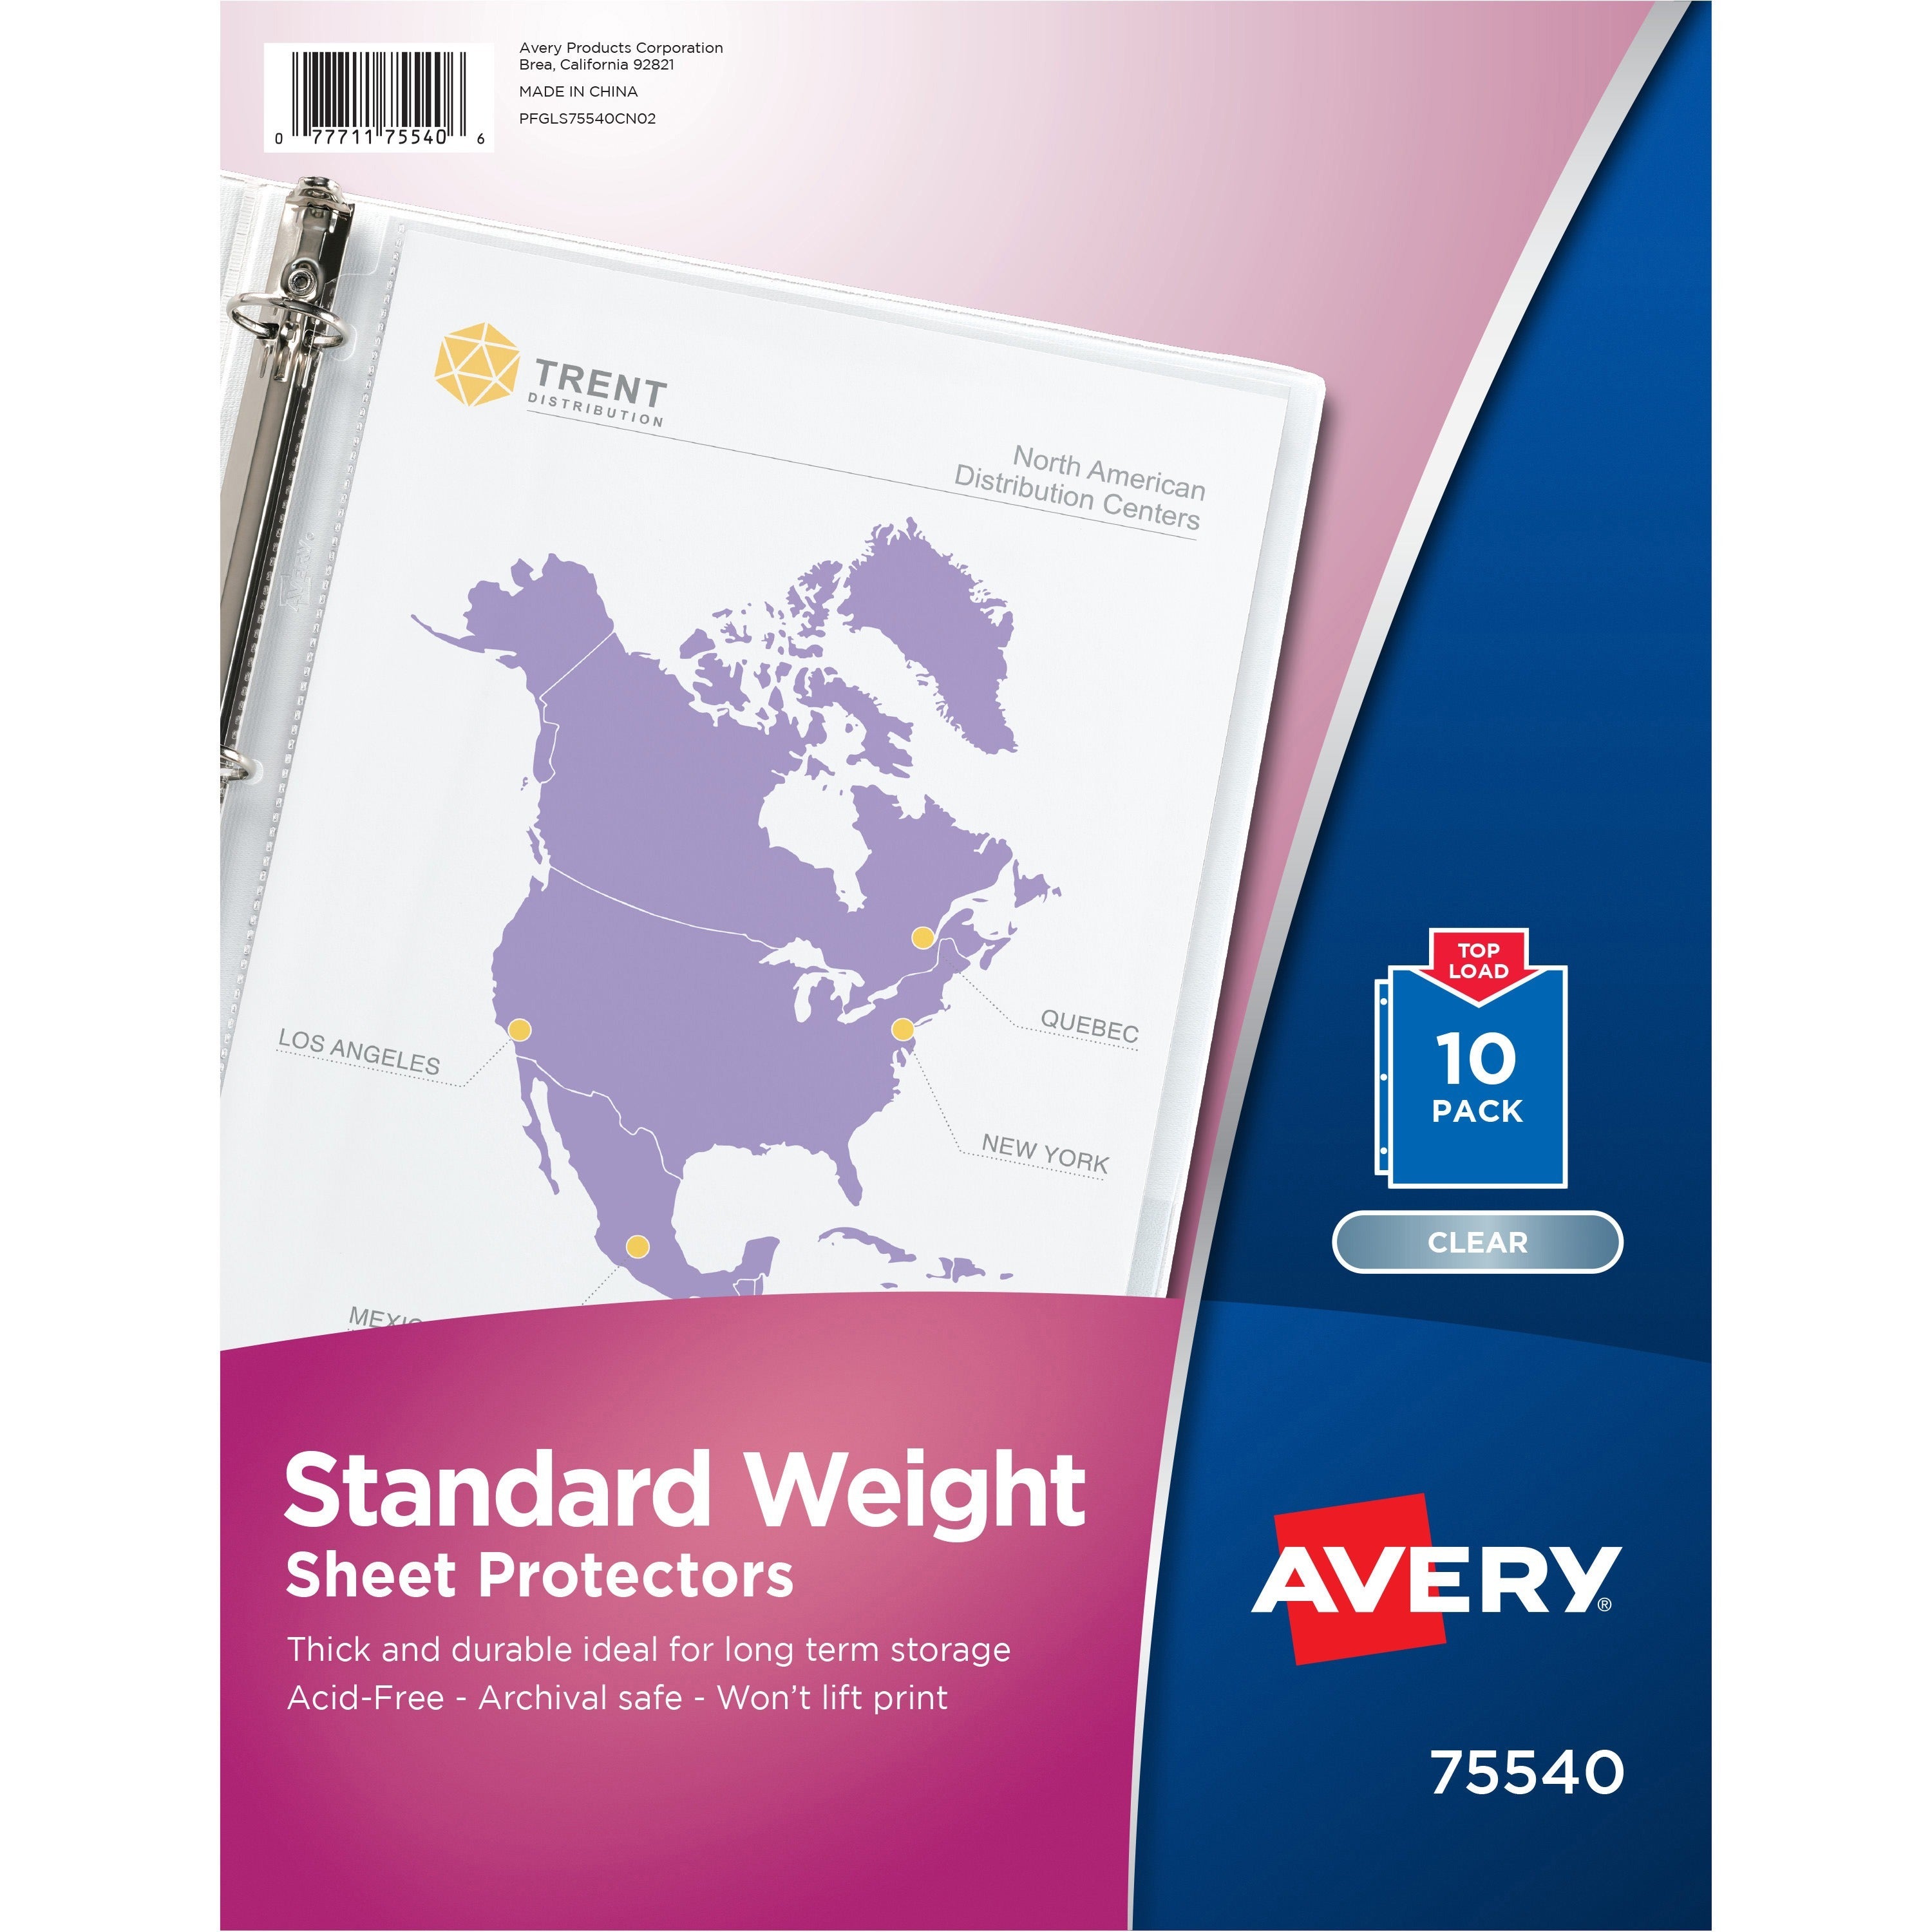 avery-standard-weight-sheet-protectors-10-x-sheet-capacity-for-letter-8-1-2-x-11-sheet-3-x-holes-ring-binder-top-loading-rectangular-semi-clear-polypropylene-10-pack_ave75540 - 1